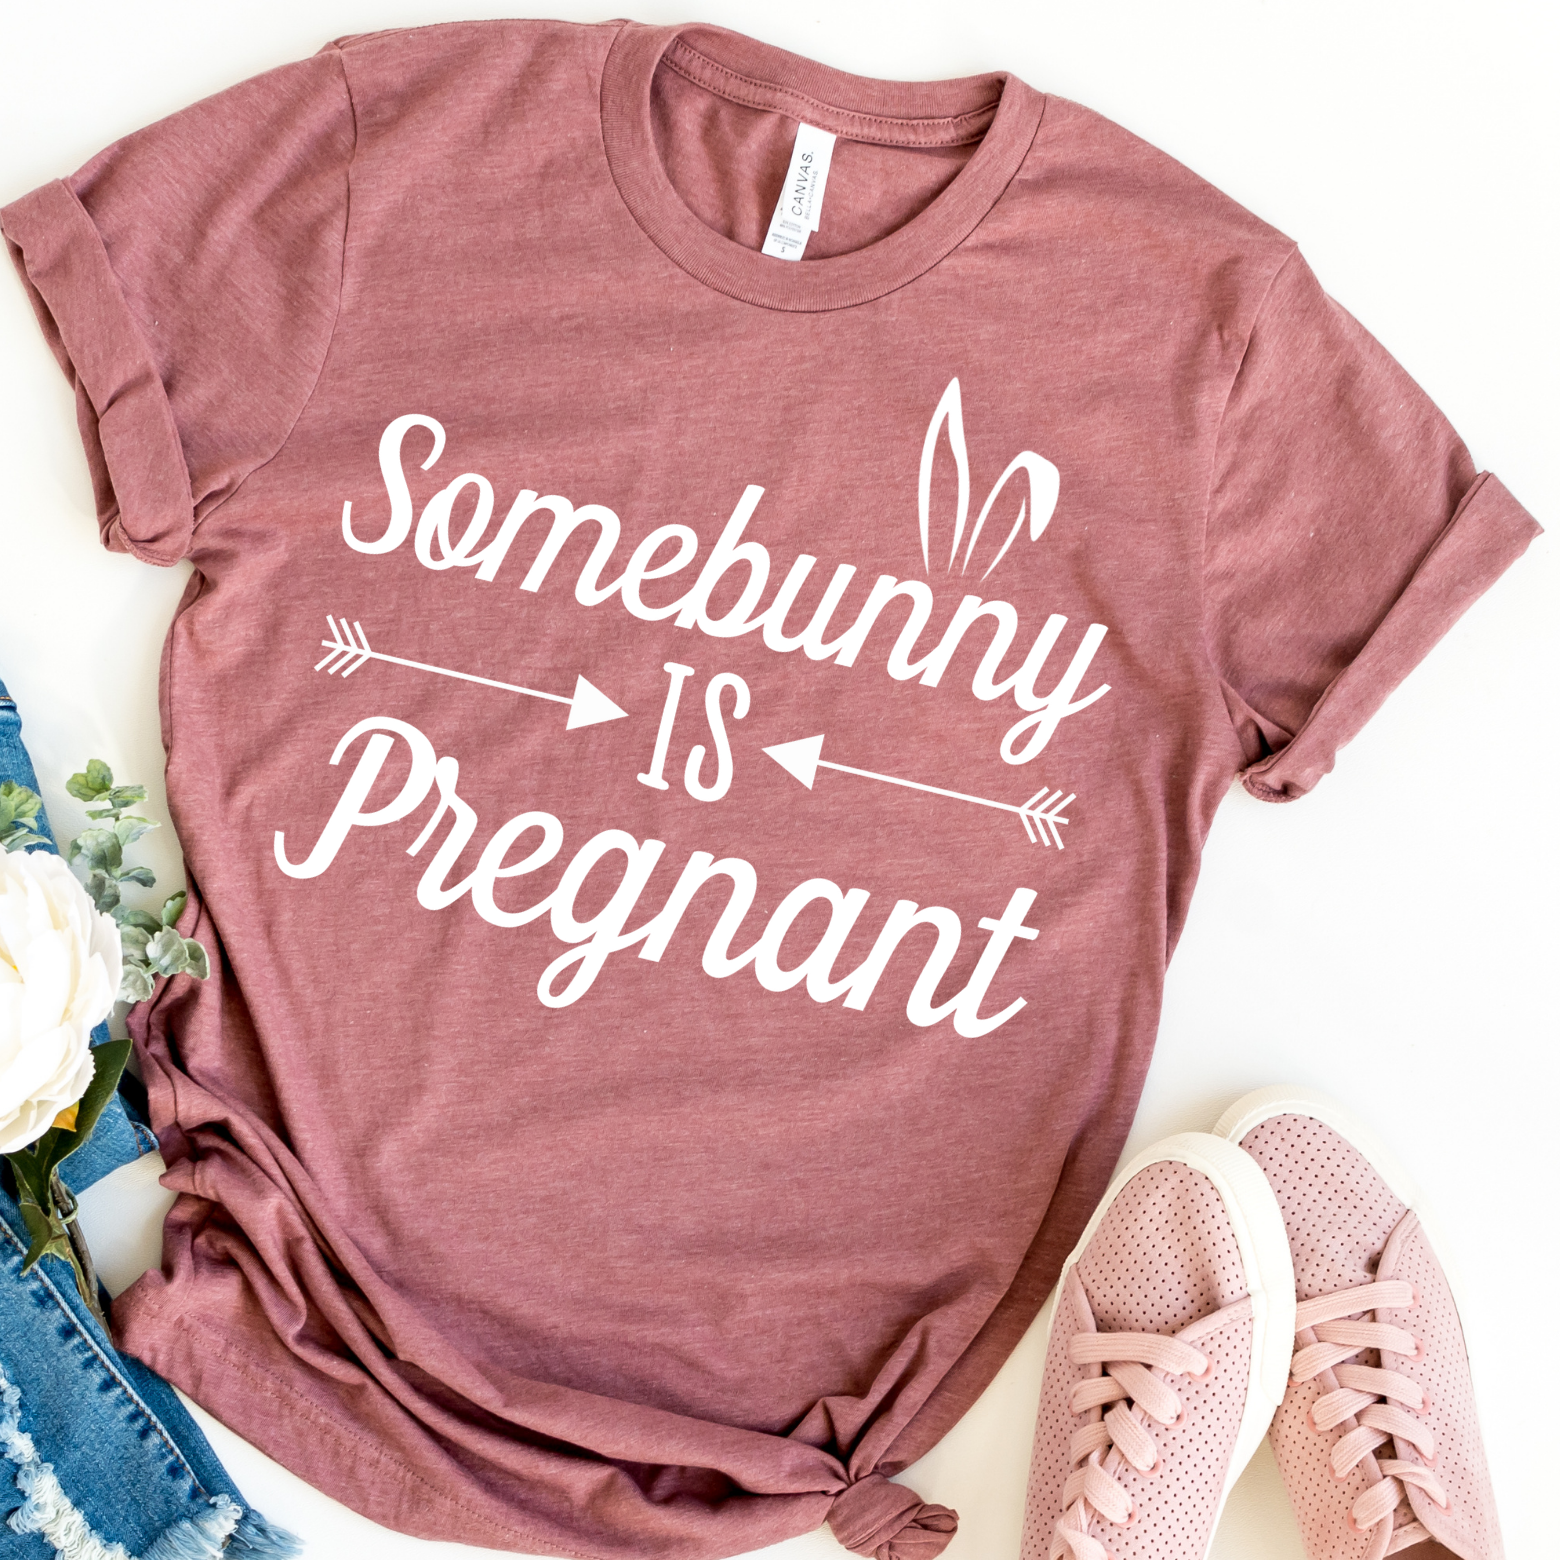  Personalized Funny Couples Mommy Daddy Matching Easter Pregnancy  Announcement Maternity Shirts for Women, Eggspecting Somebunny Gender  Reveal TShirts : Handmade Products